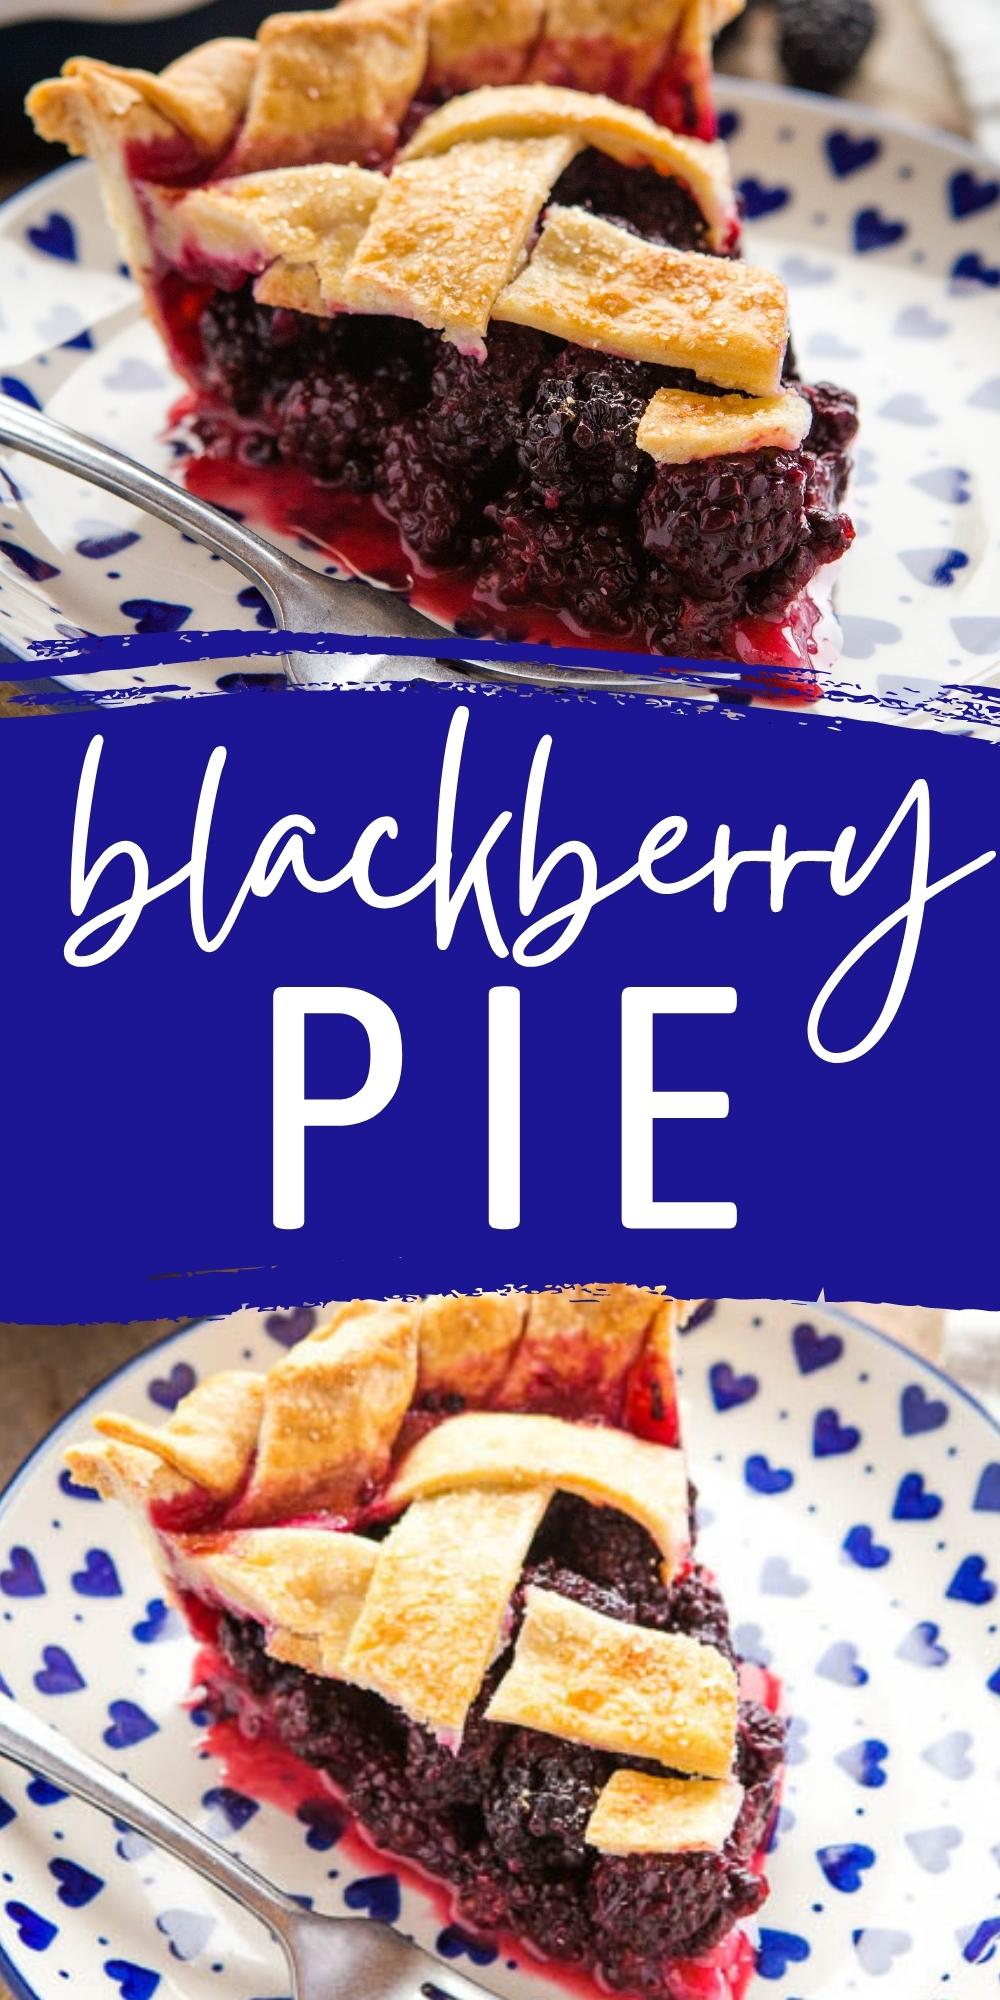 This Blackberry Pie recipe is the perfect summer dessert made with an all-butter crust and fresh juicy blackberries. Recipe from thebusybaker.ca! #blackberrypie #fruit #fruitpie #homemadepie #blackberries #easypie #nofailpietips #bakingtips via @busybakerblog